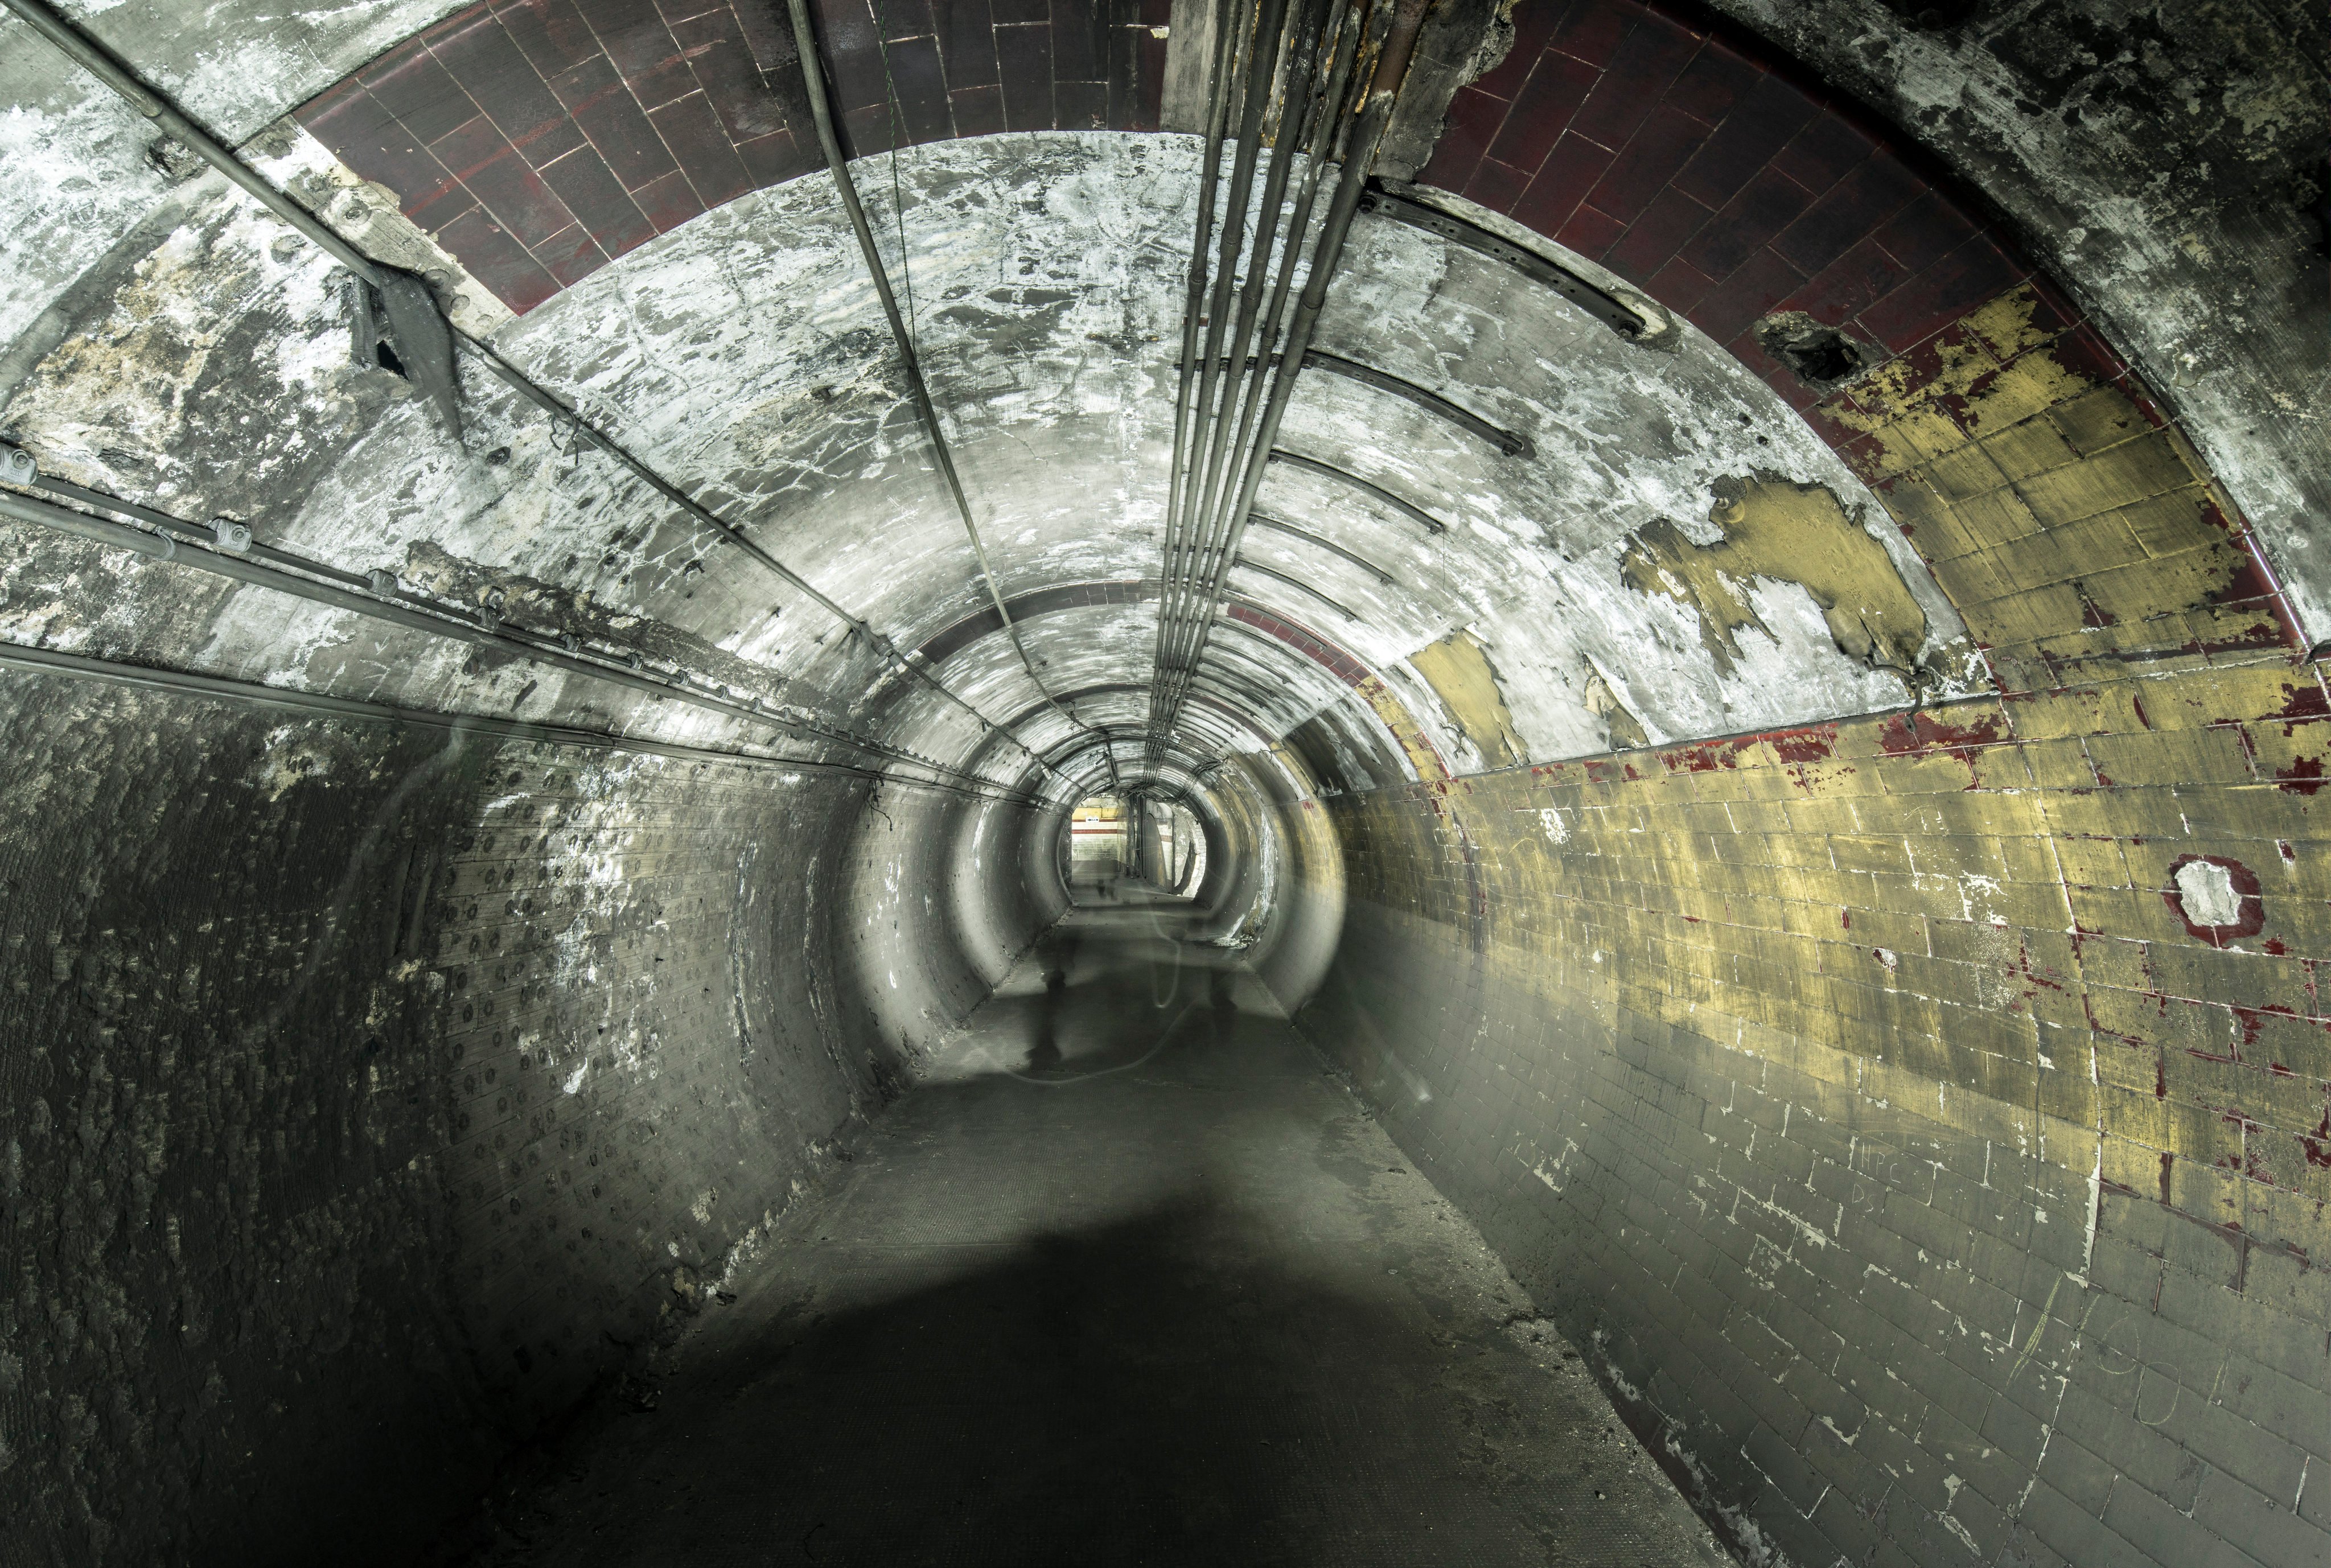 A tunnel at the disused Down Street Tube Station in London. The fund manager who bought the tunnels has a £220 million (US$269 million) plan to turn them into a tourist attraction ‘as iconic as the London Eye’. Photo: AFP/Transport for London